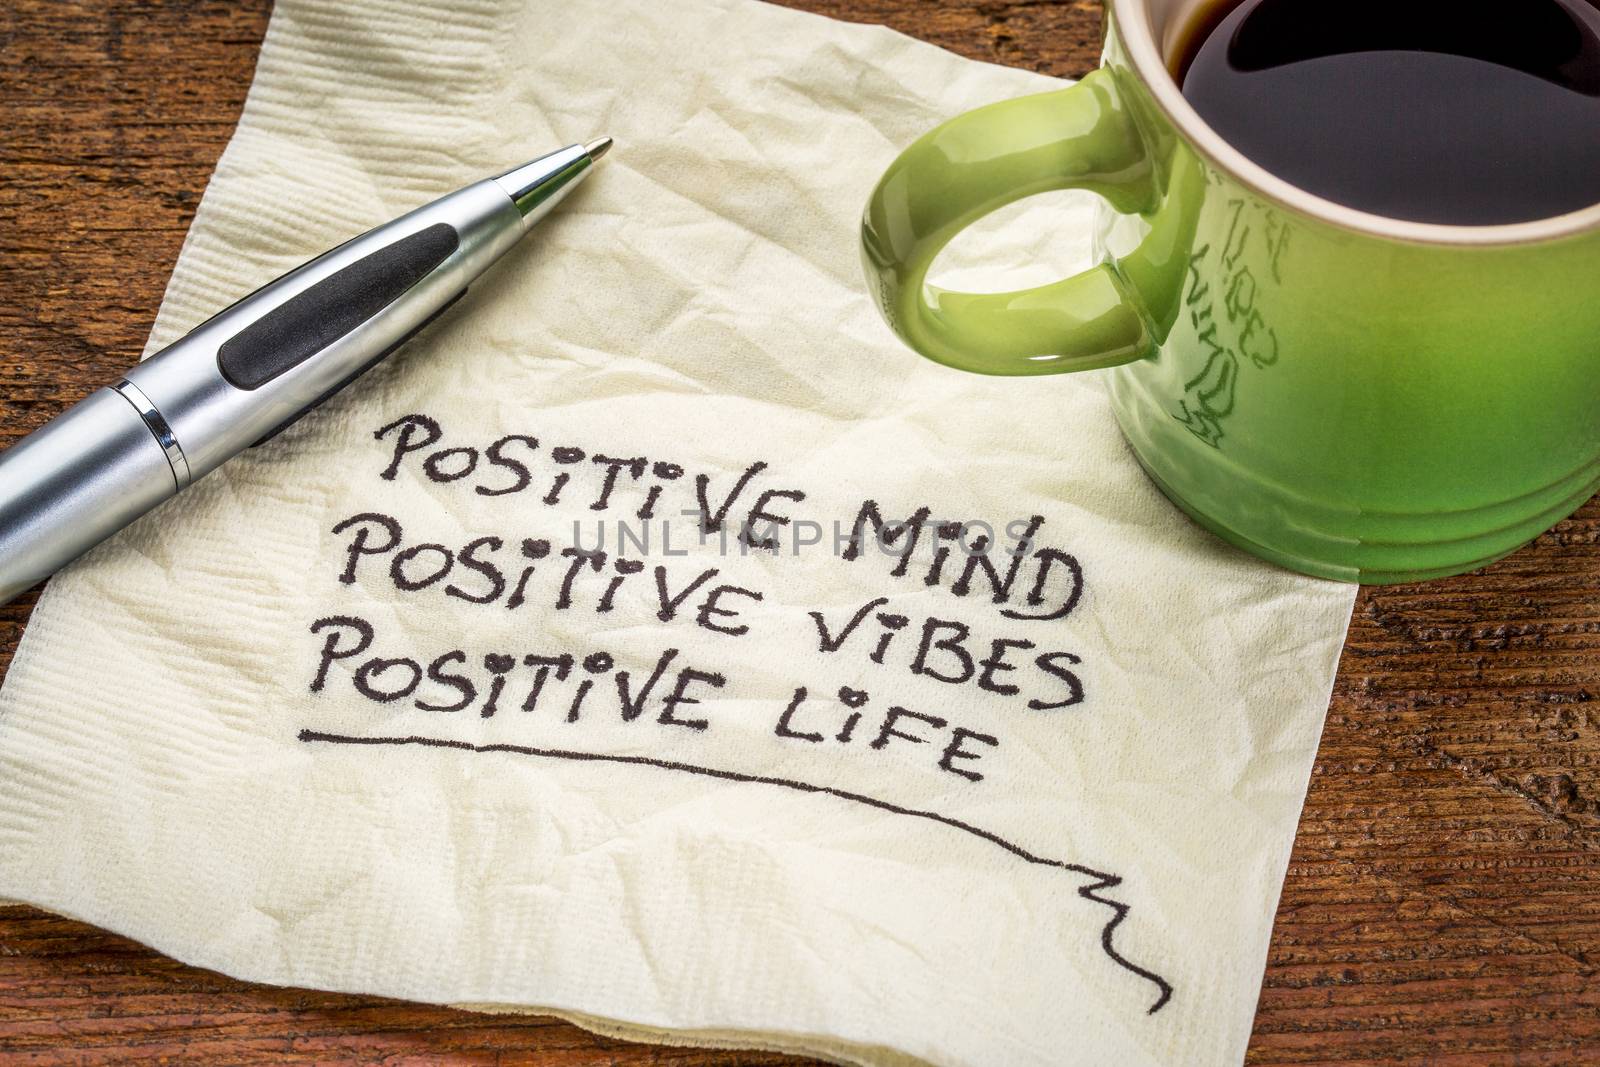 positive mind,  positive vibes, positive life - motivational handwriting on a napkin with a cup of coffee